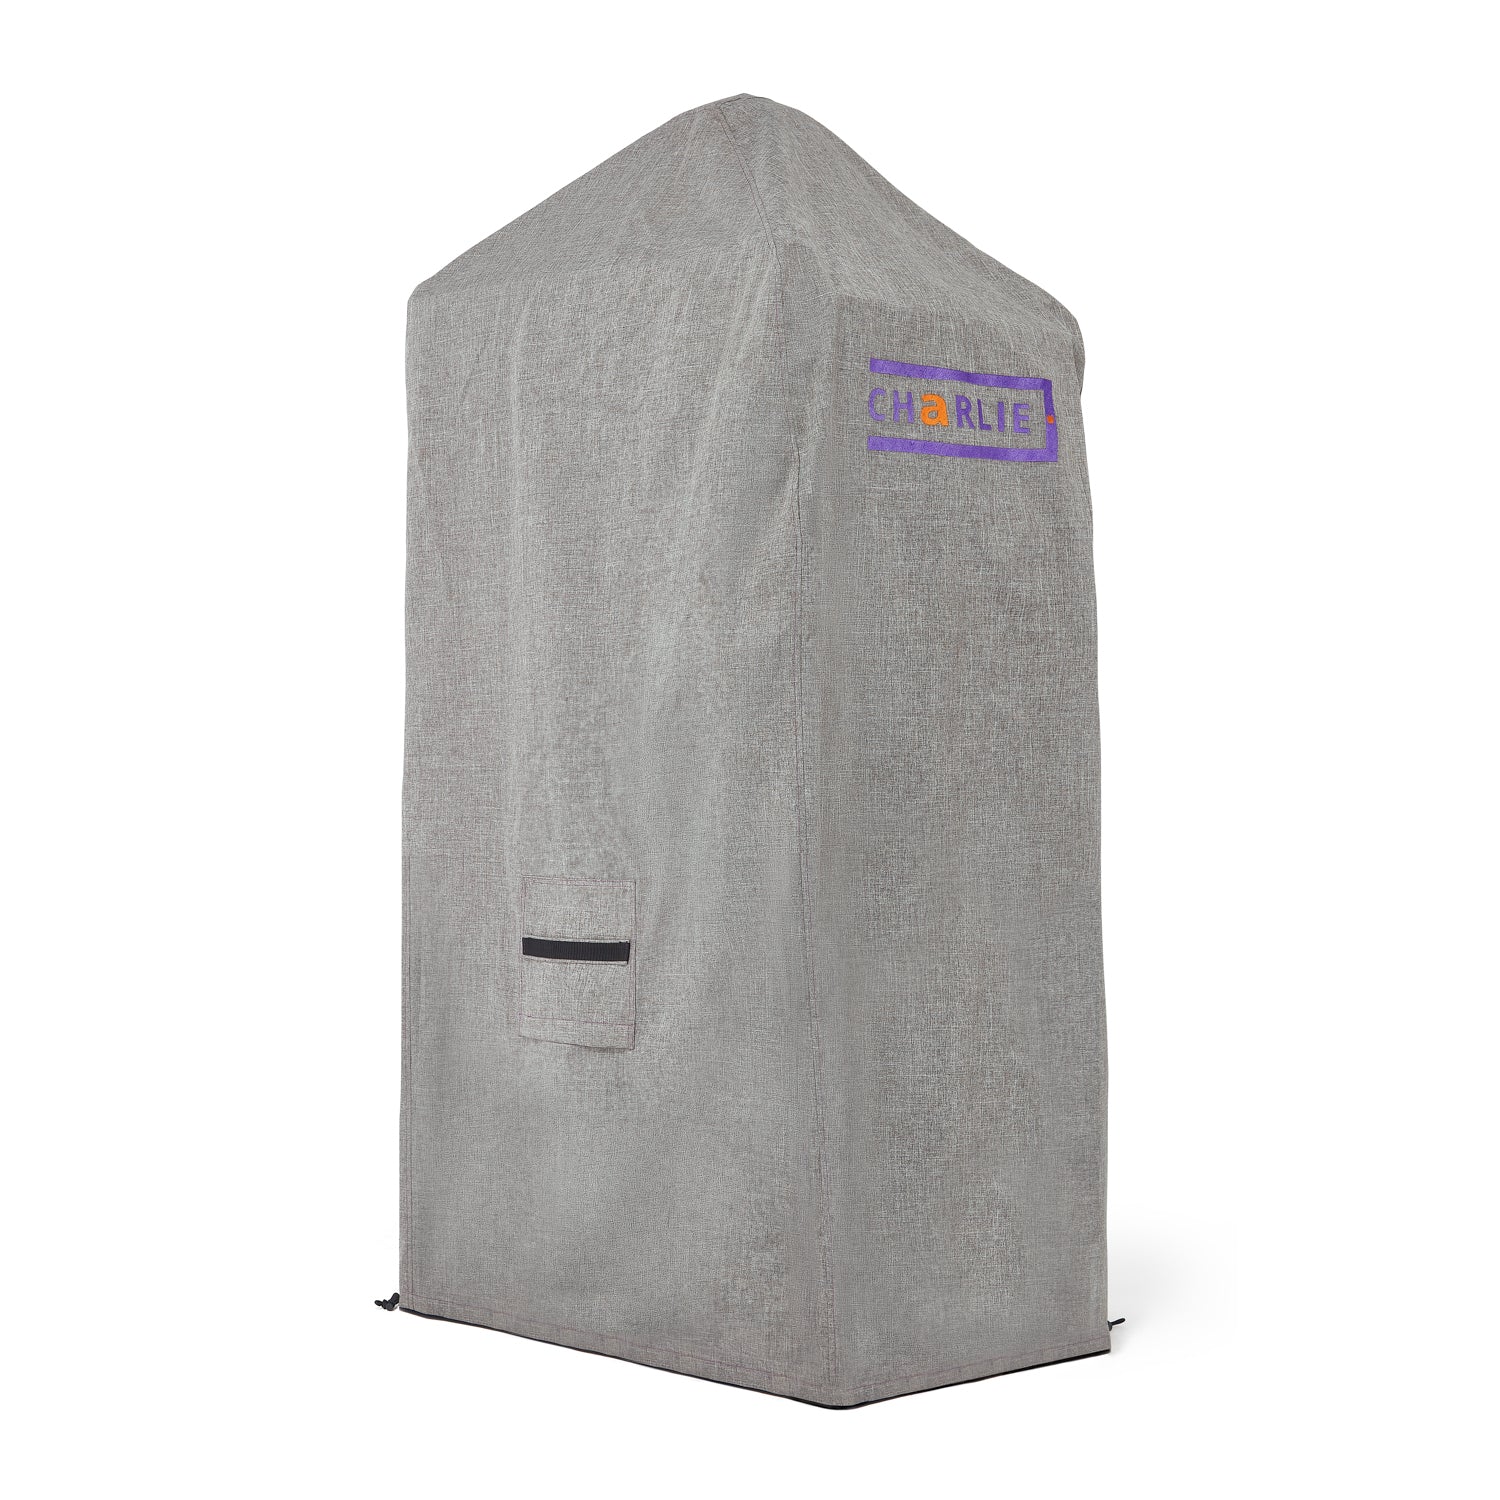 Charlie Oven Cover - a beautiful cover designed to look good in the garden.  With breathable pockets on each side.